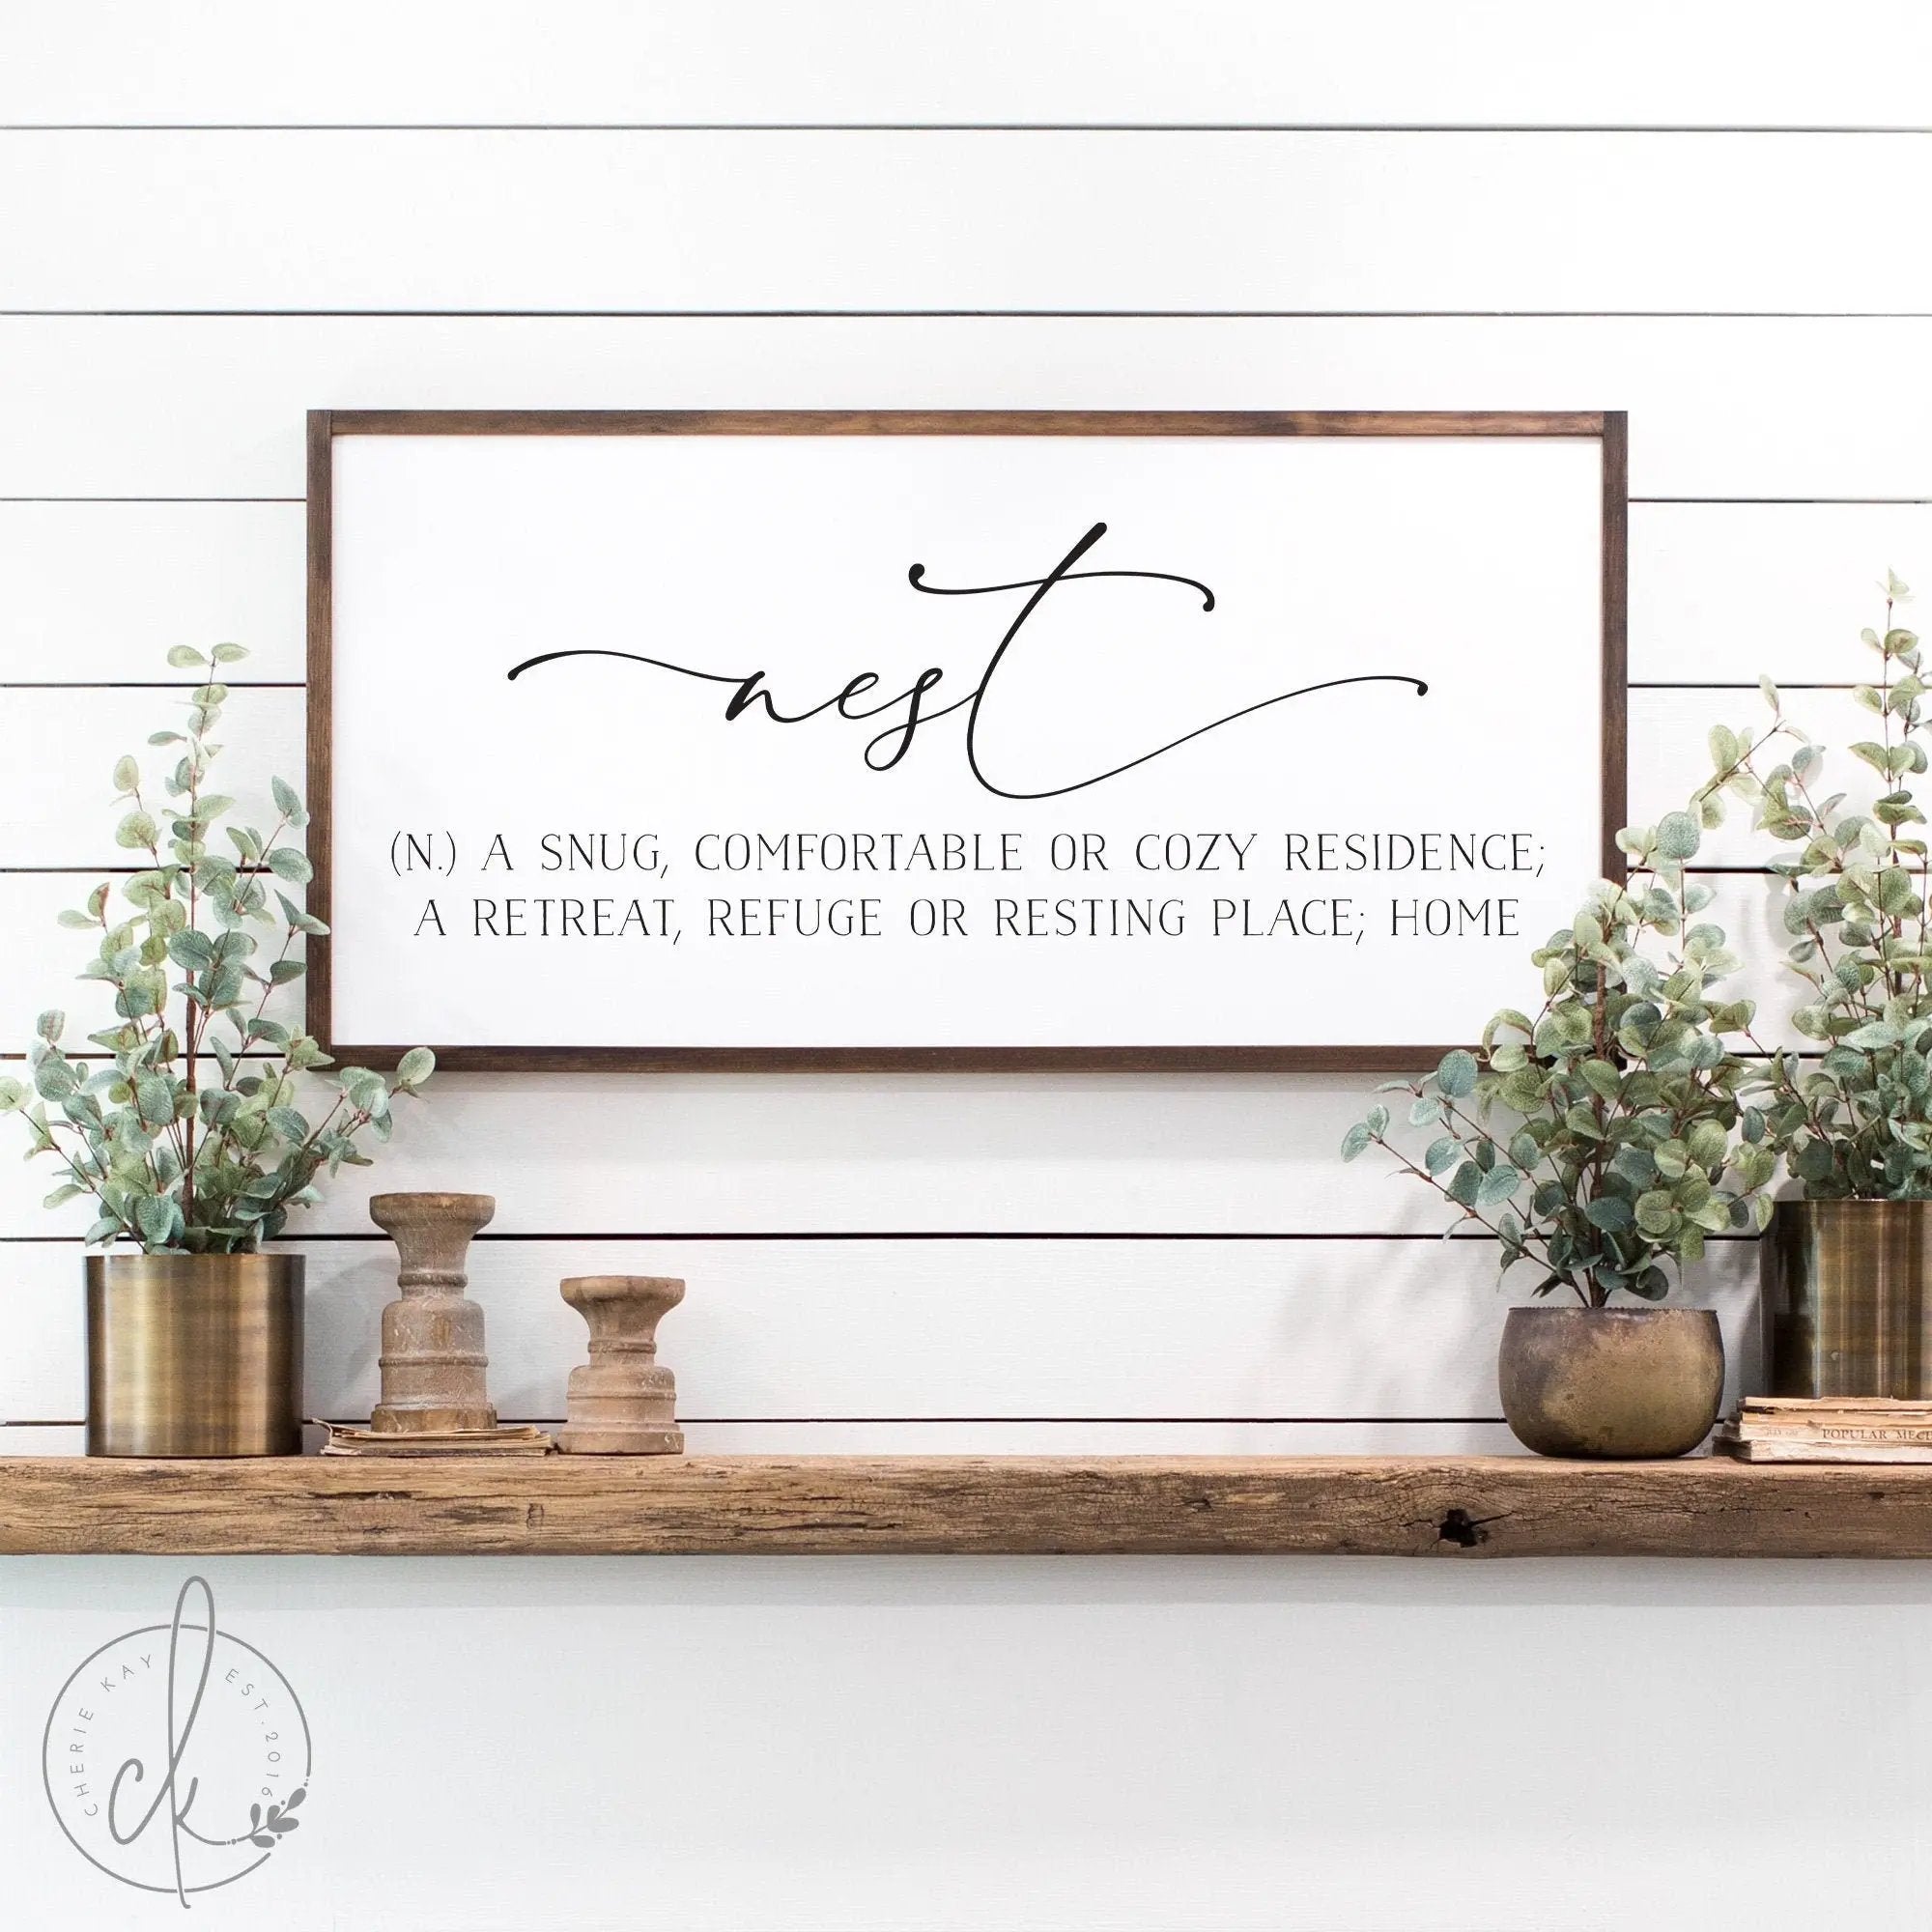 nest definition sign | home wall decor sign | wood signs | farmhouse wall decor | signs for home